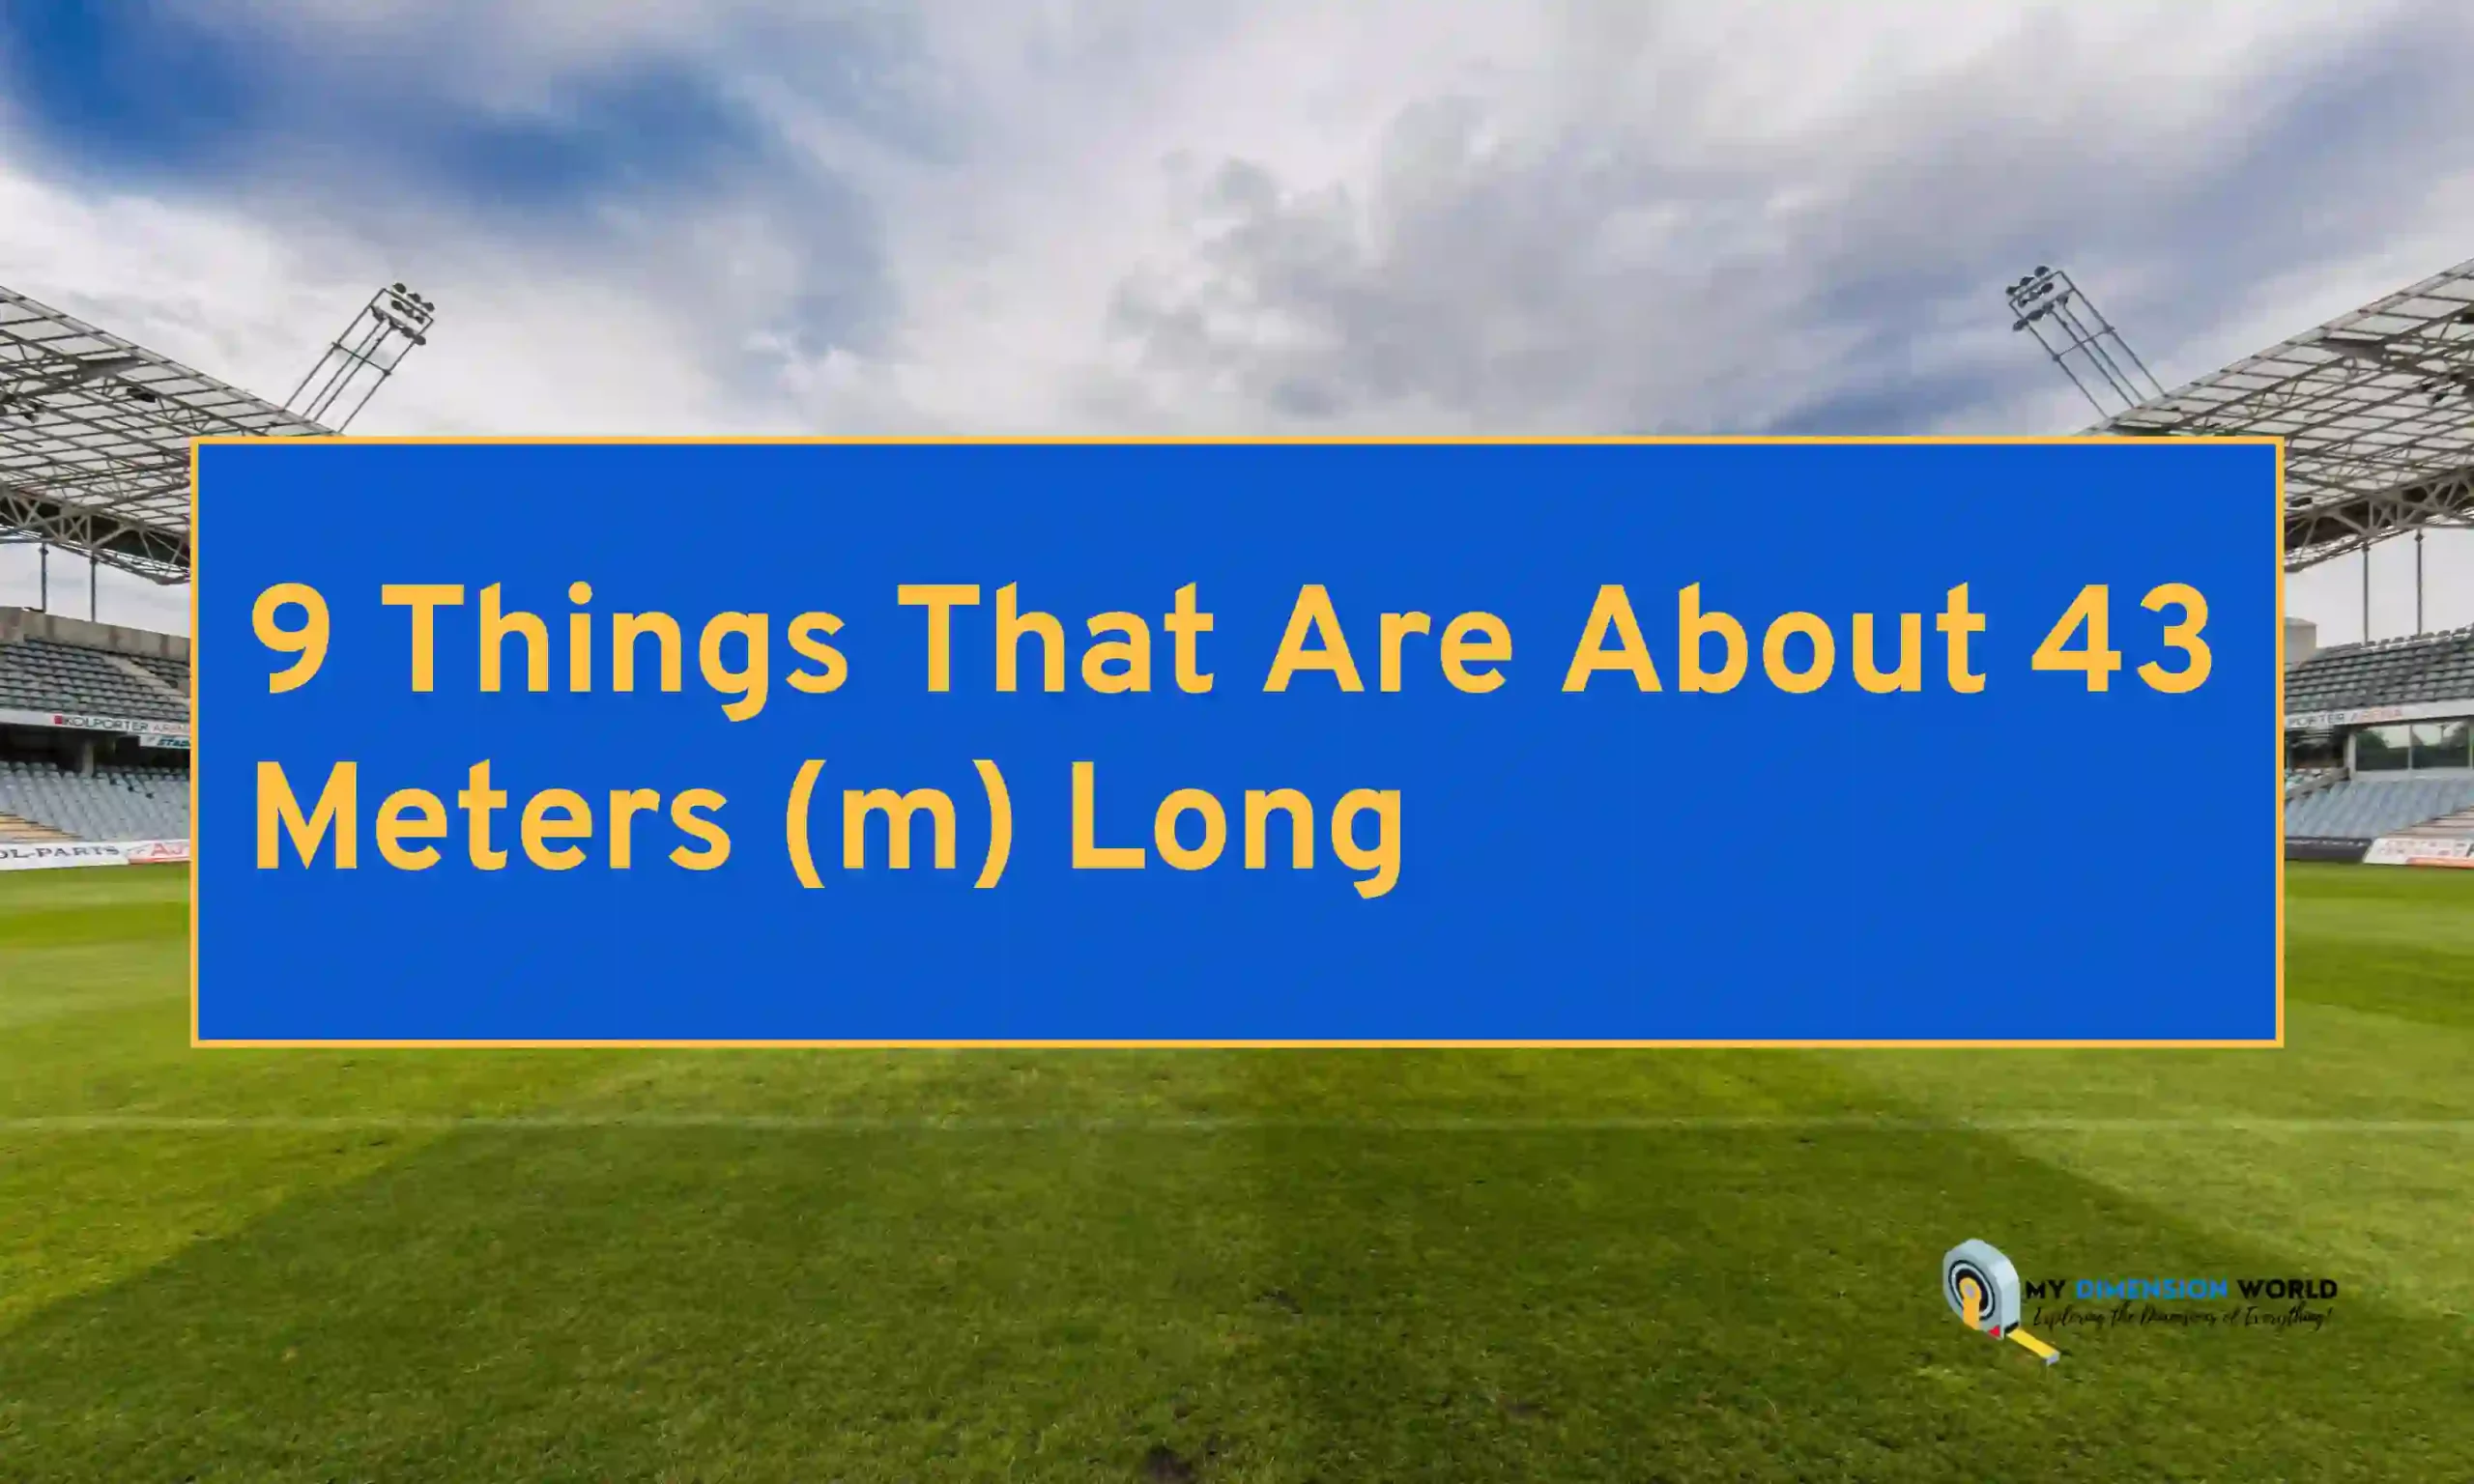 9 Things That Are About 43 Meters (m) Long